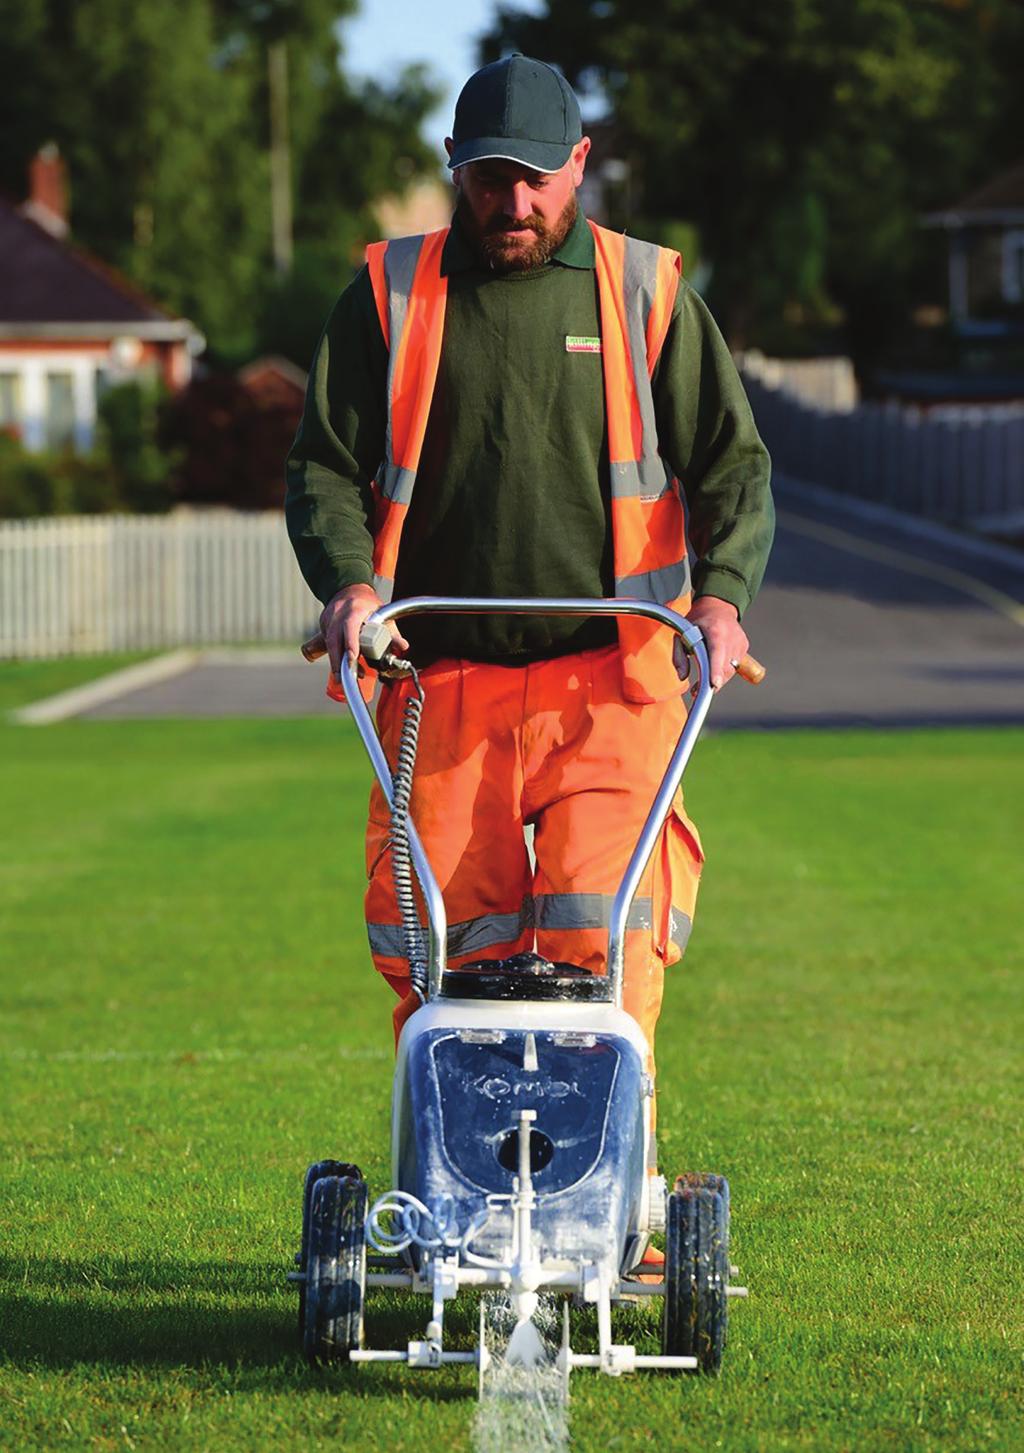 Grounds Maintenance Services With over 40 years experience in grounds maintenance, our teams use only the latest and most efficient mowing equipment to ensure that the highest standards of work are